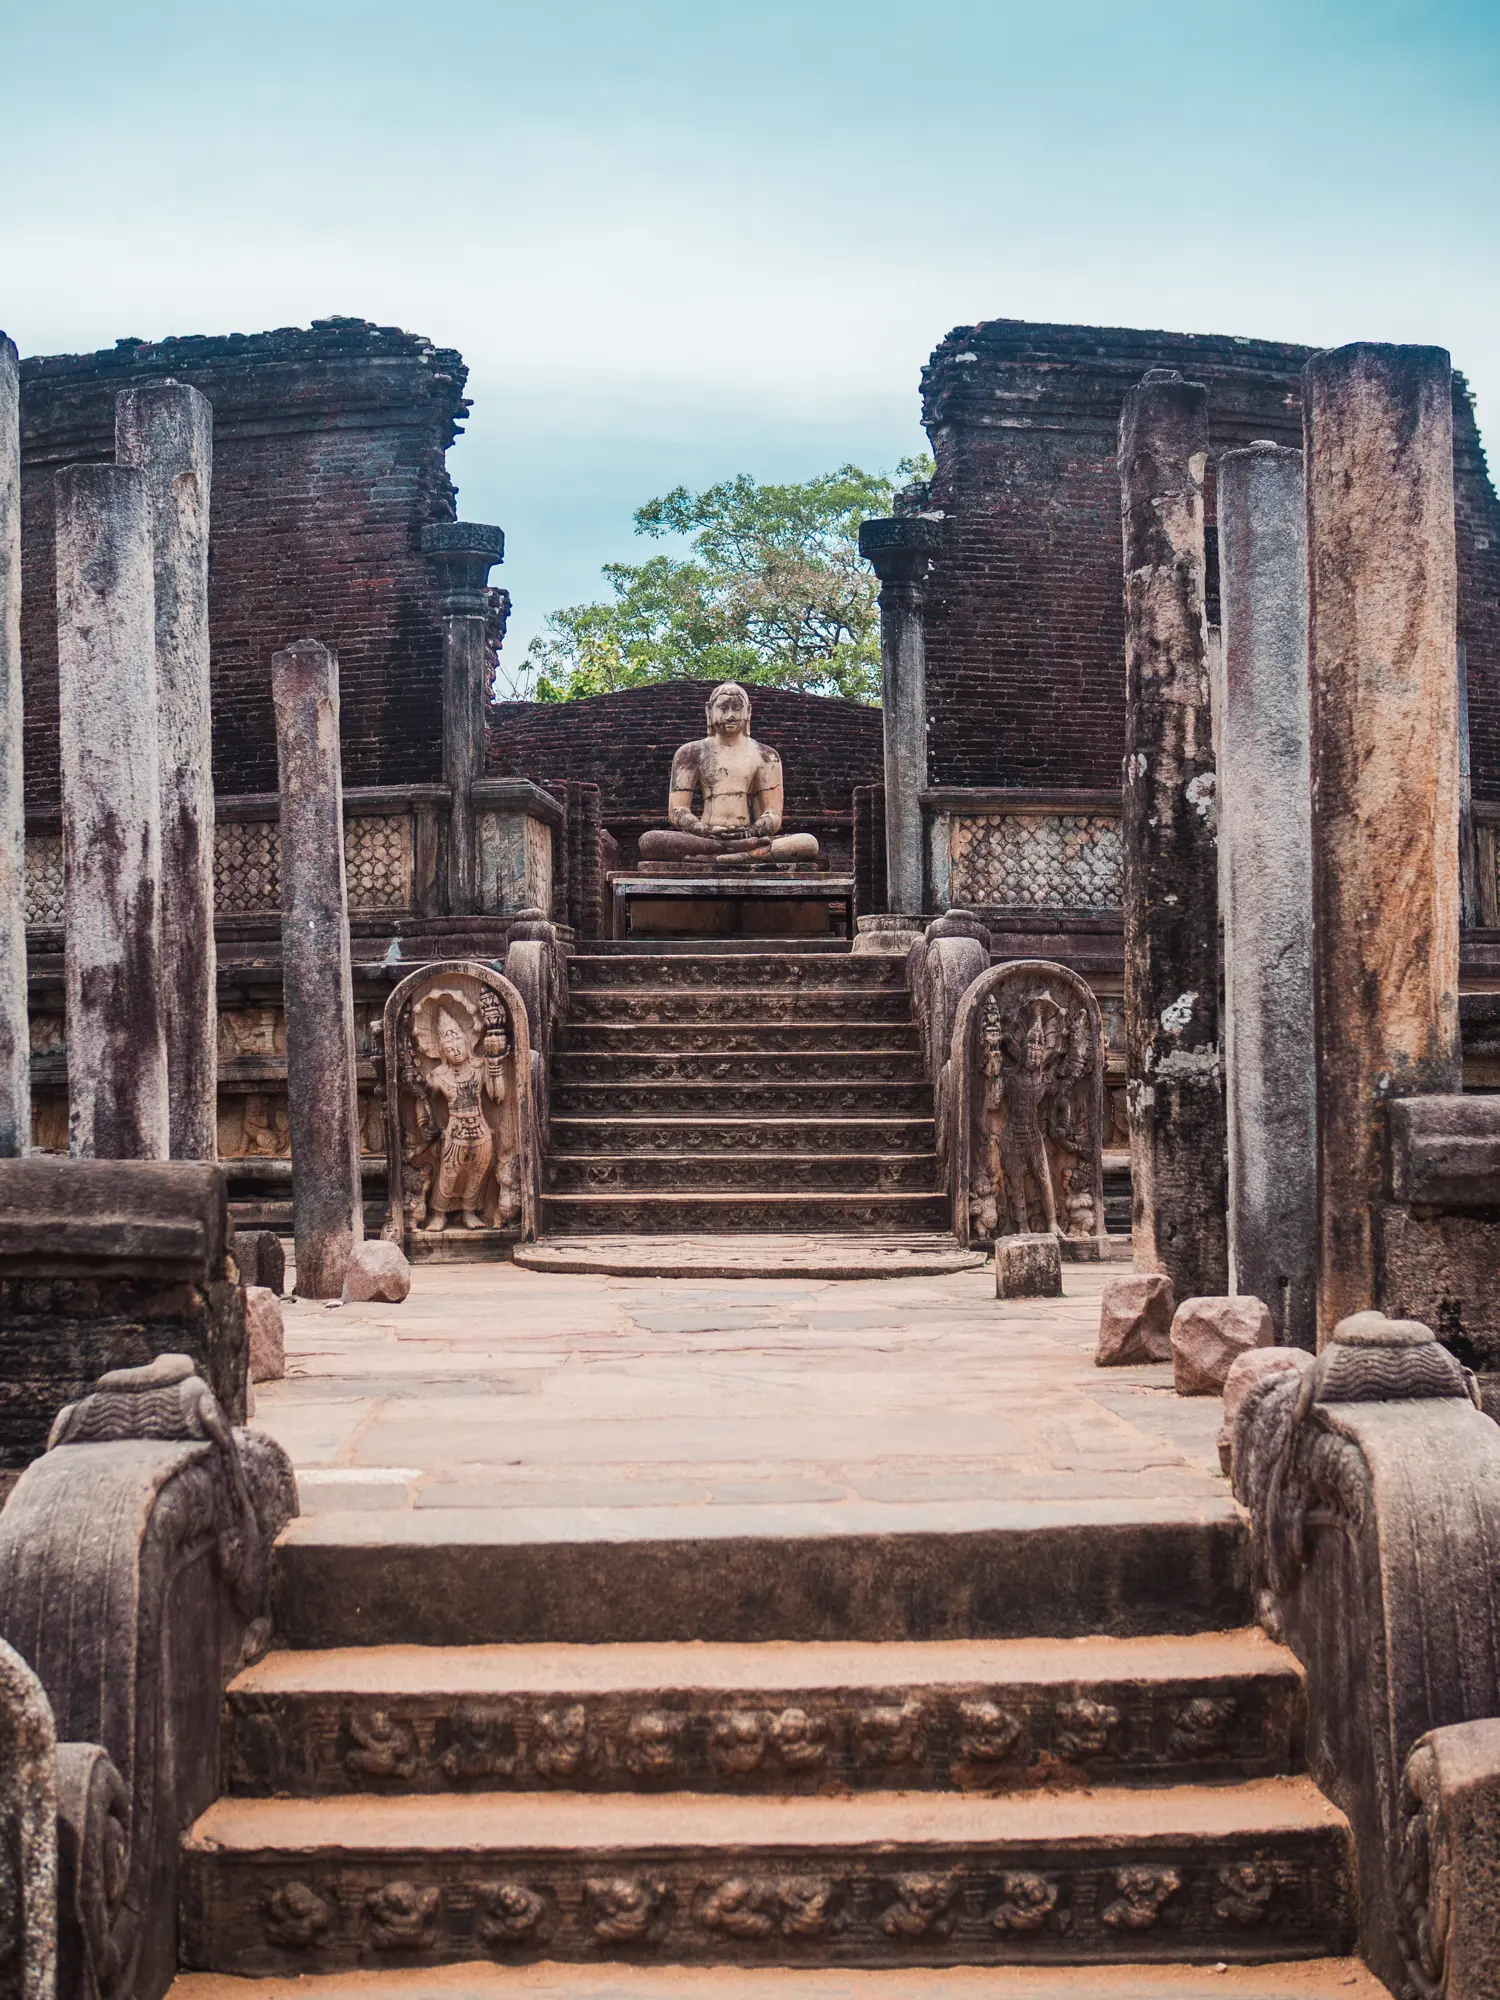 Large stone Buddha sitting at the top of stairs, surrounded by a circular brick wall, in the Sacred Quadrangle in Polonnaruwa.